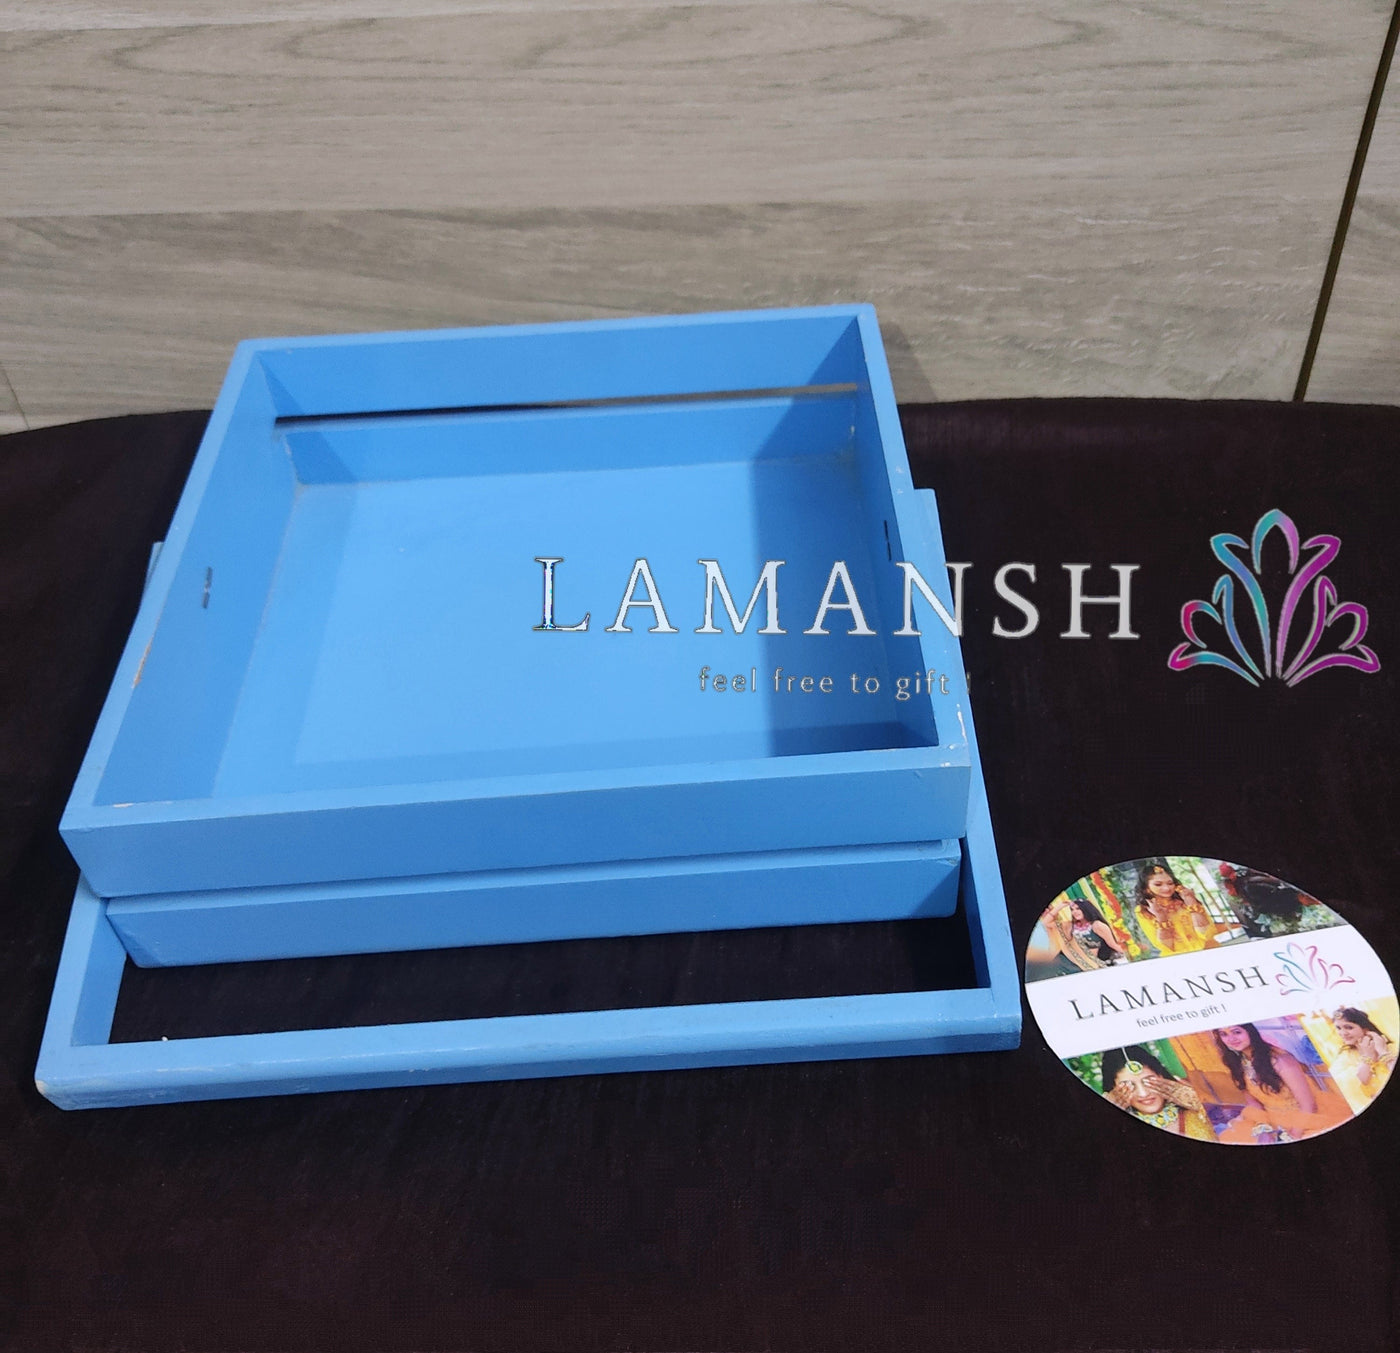 Lamansh pinewood baskets tray LAMANSH® 10×10 inch Square Pinewood Tray with handle for Gifting 🎁 & Giveaways Tray platter for serving gifts packing / Ethnic pinewood basket in assorted colors